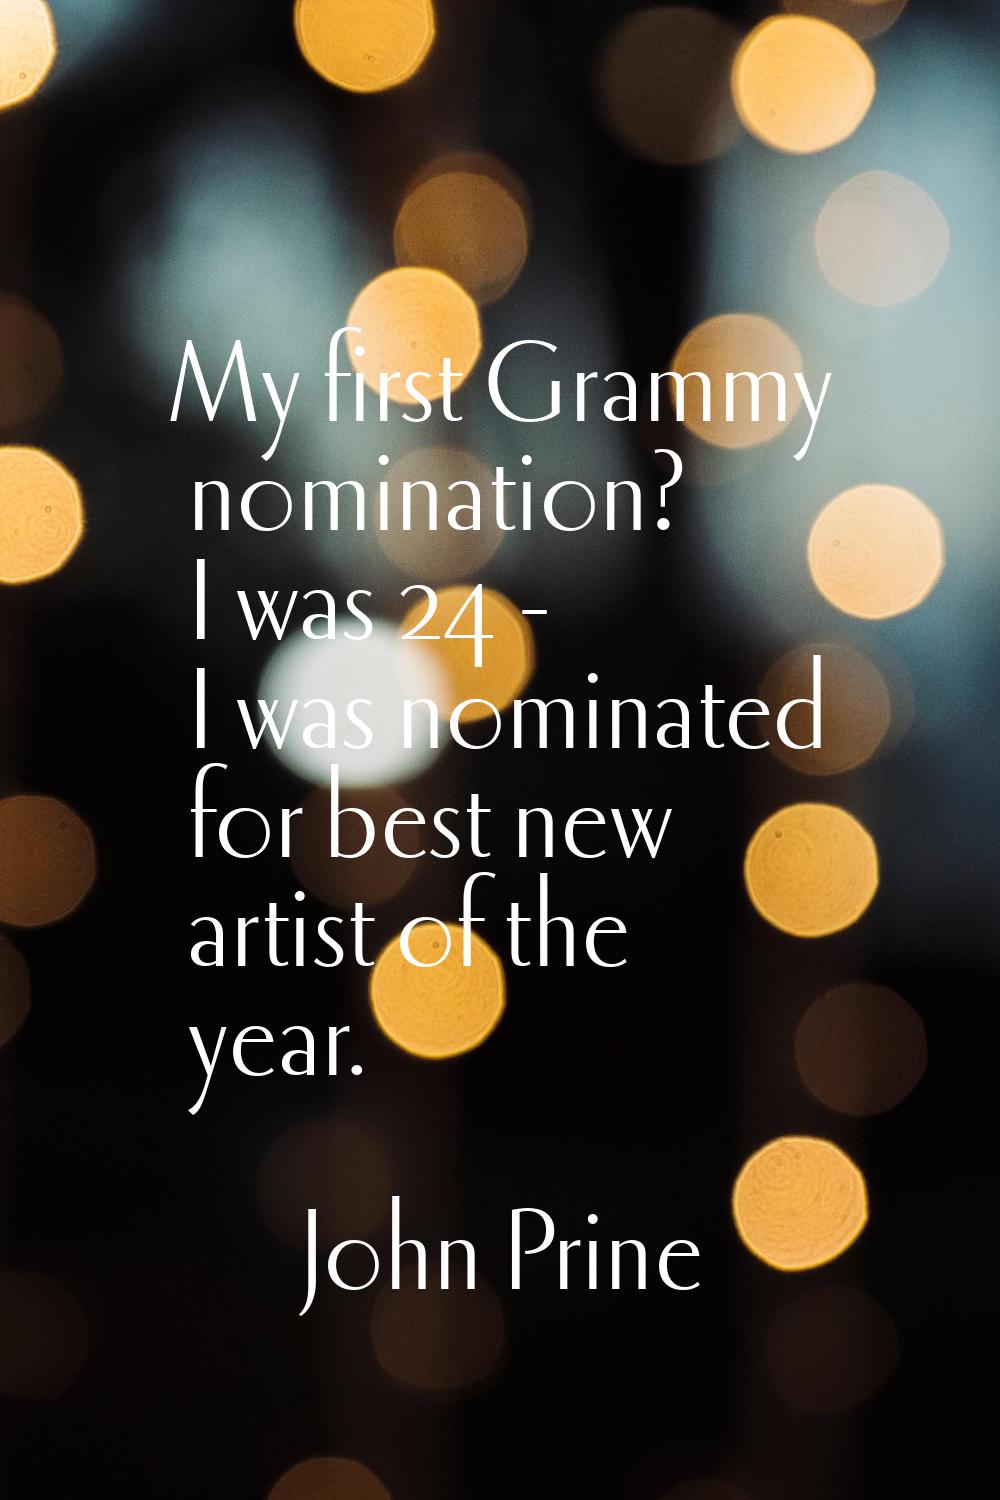 My first Grammy nomination? I was 24 - I was nominated for best new artist of the year.